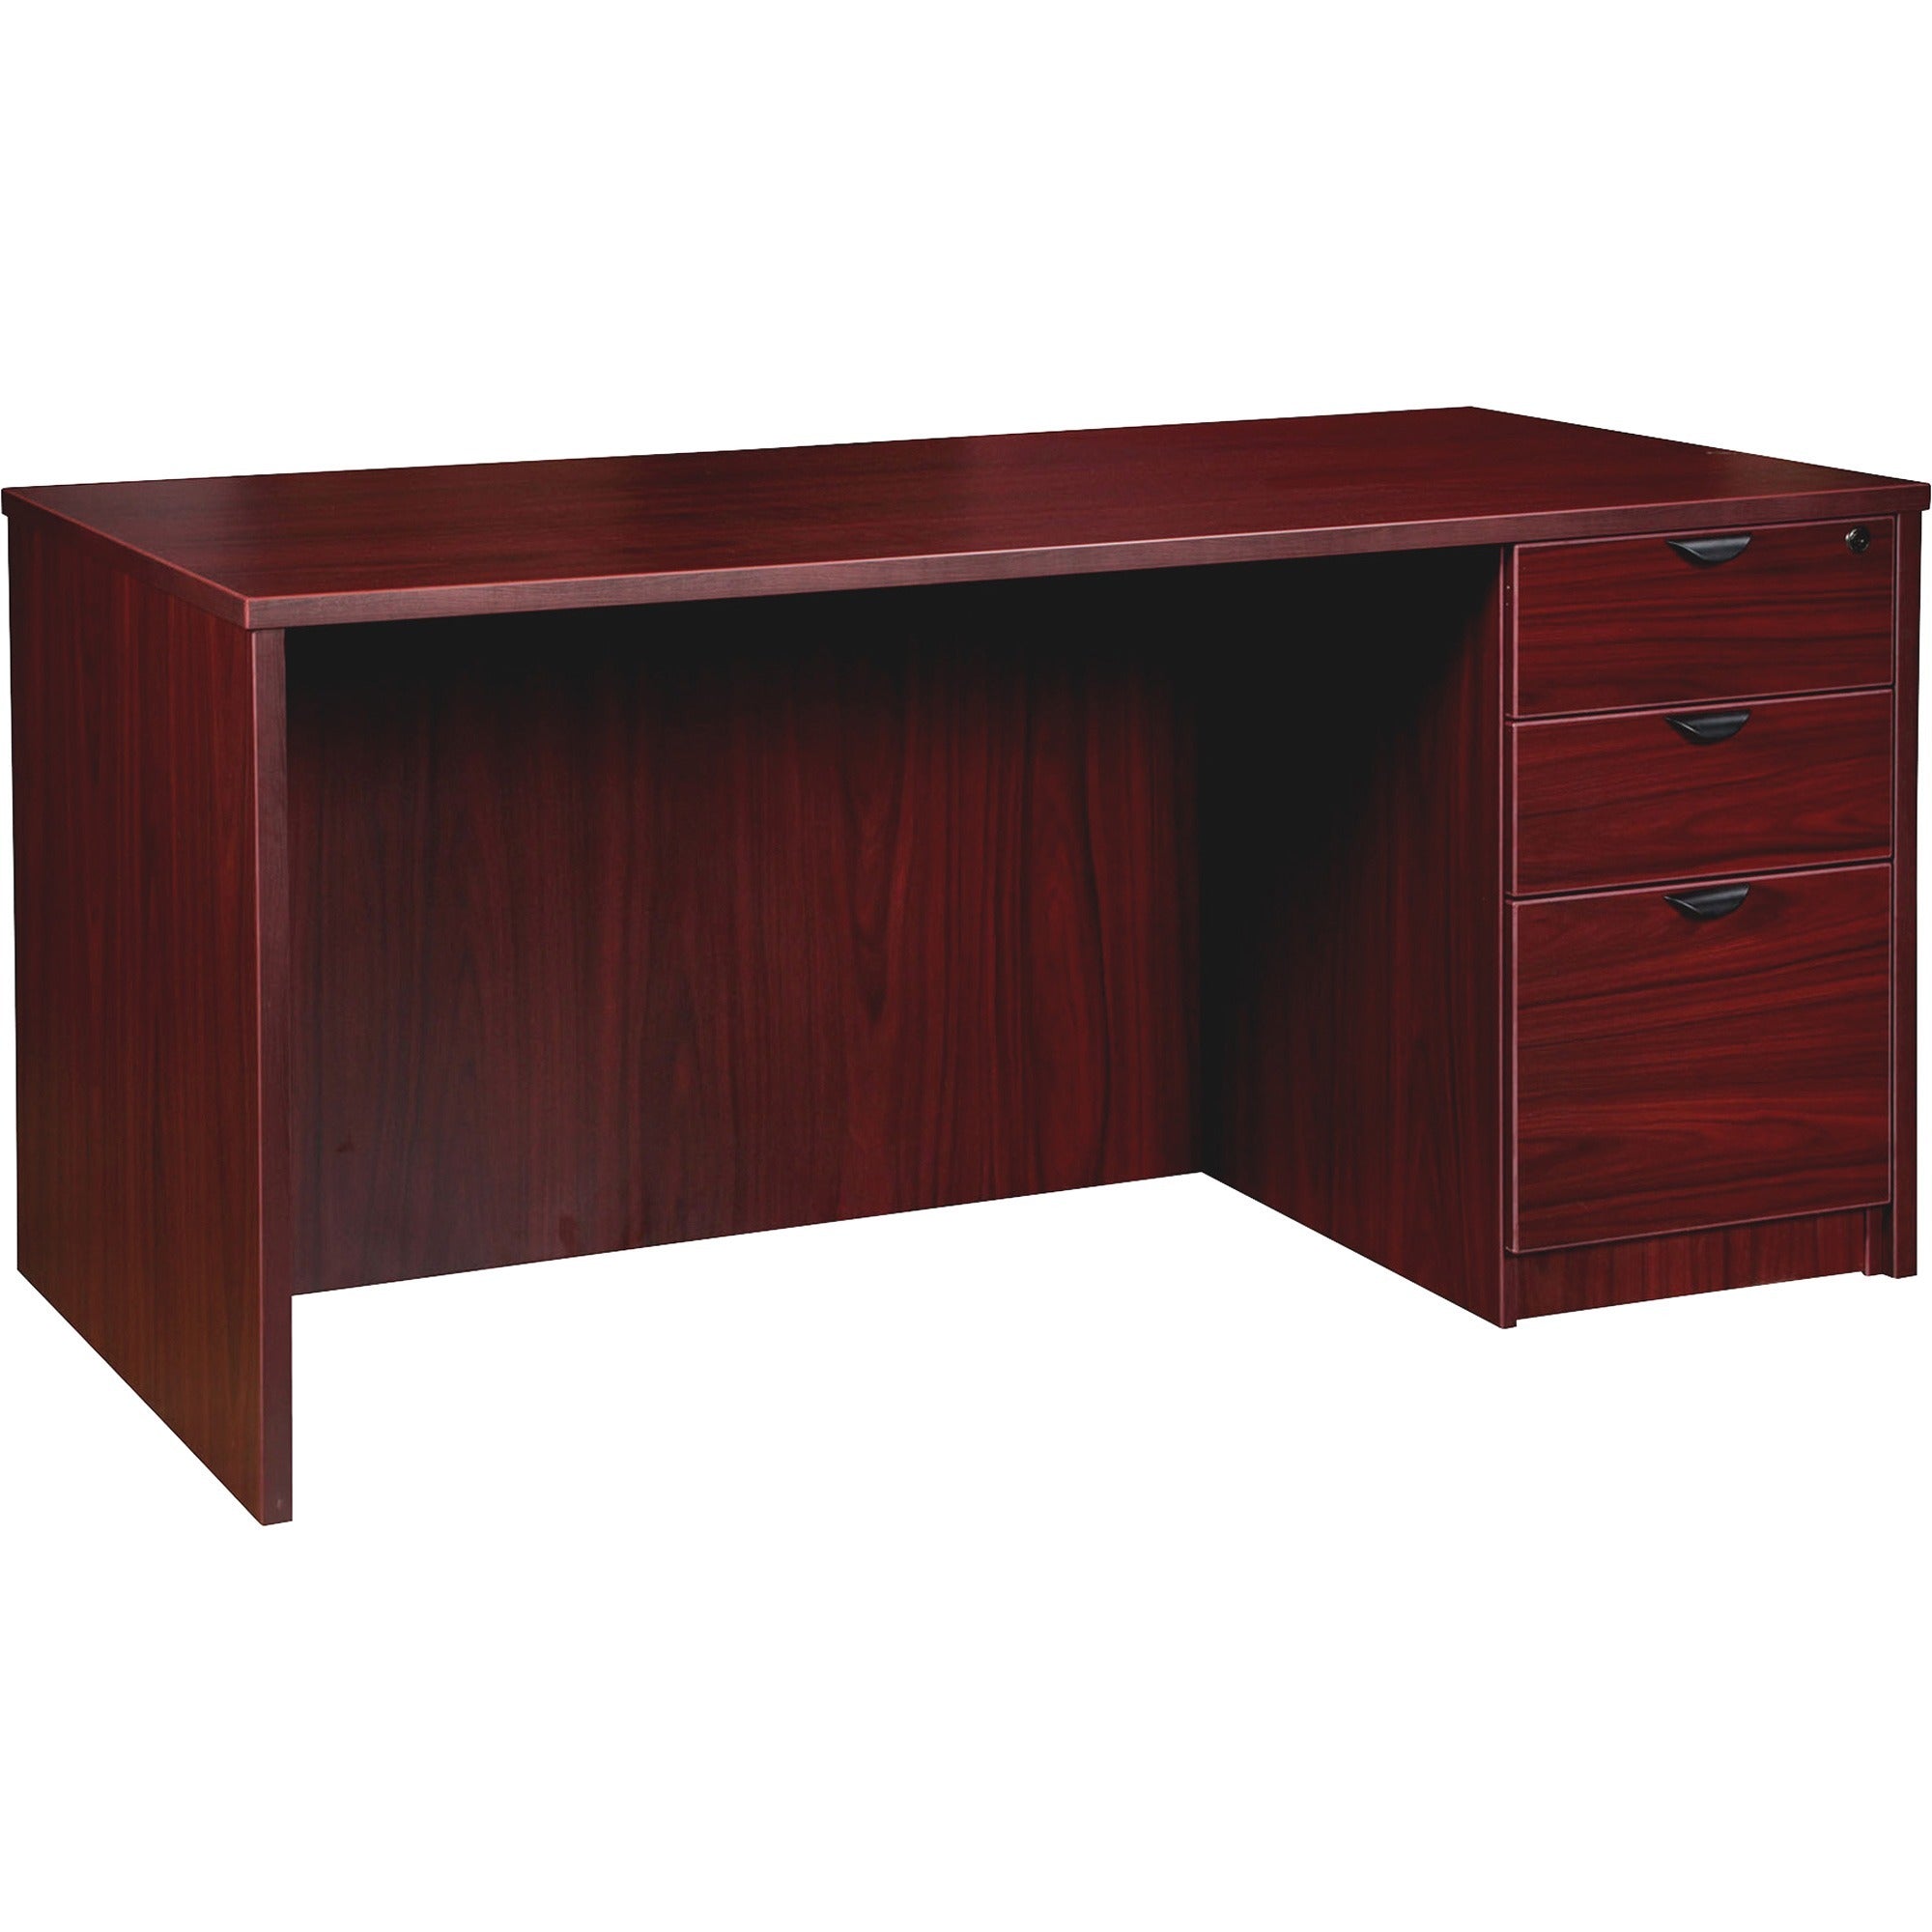 lorell-prominence-20-right-pedestal-desk-1-top-66-x-3029-3-x-file-box-drawers-single-pedestal-on-right-side-band-edge-material-particleboard-finish-mahogany-laminate-thermofused-melamine-tfm_llrpd3066rspmy - 1